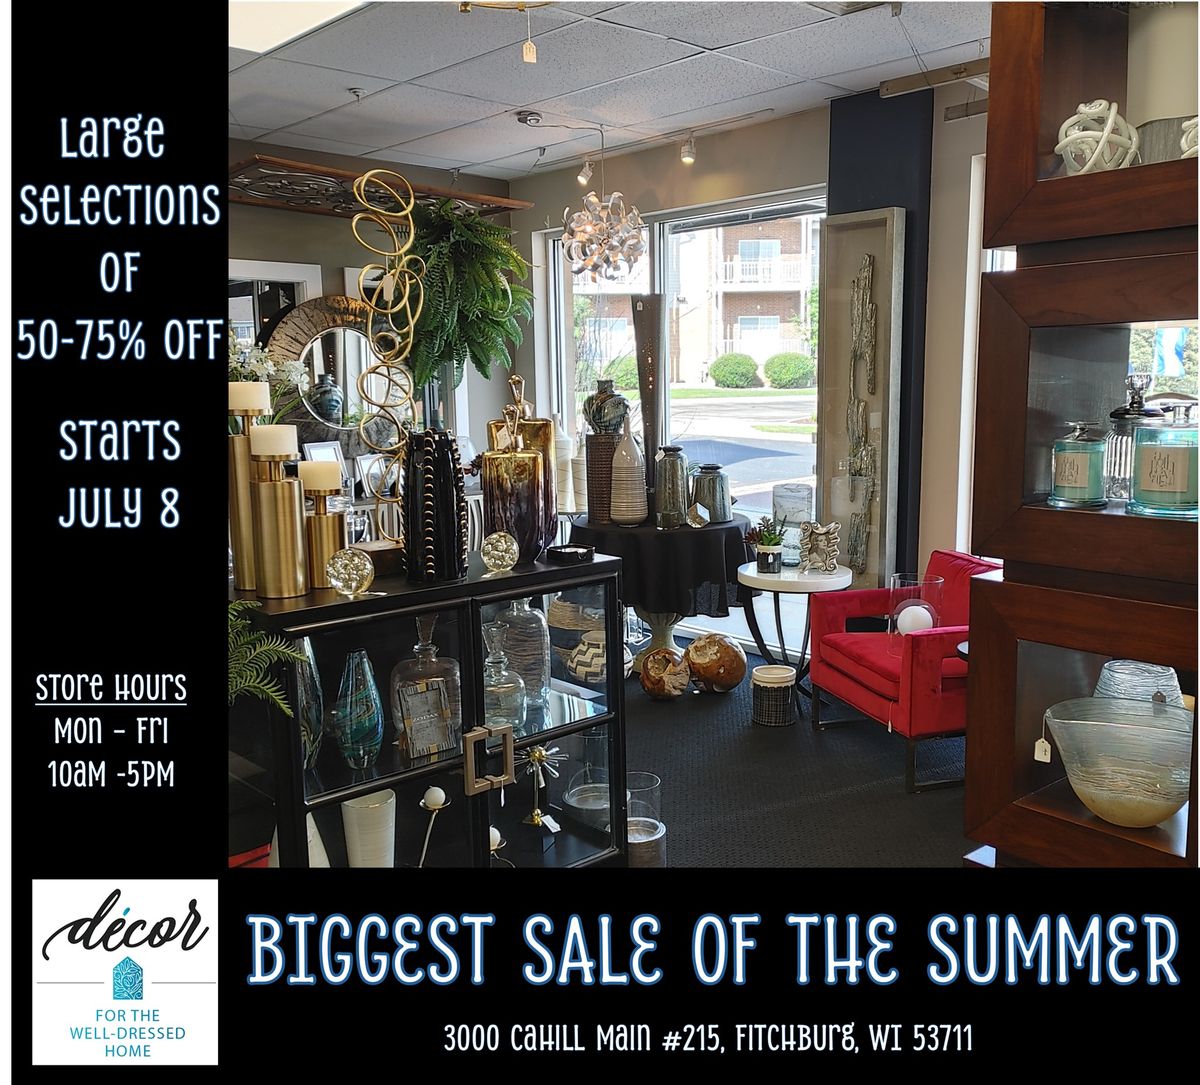 Decor's Biggest Sale of the Summer